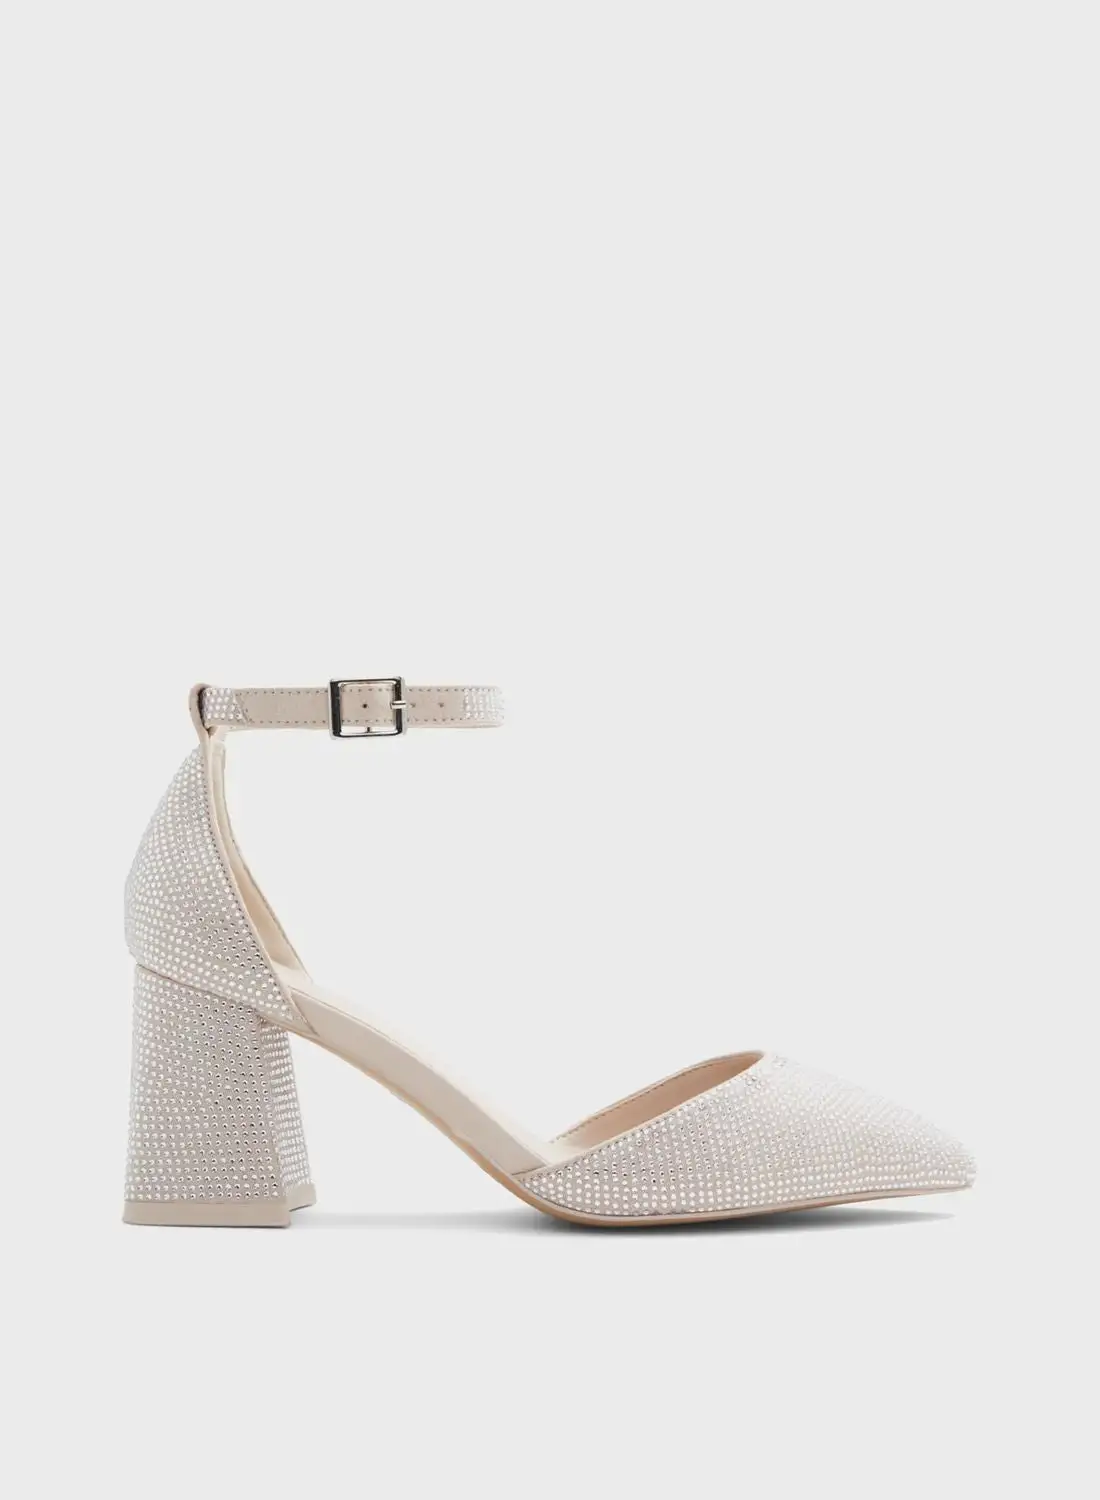 CALL IT SPRING Daliaa Pointed Toe Pumps